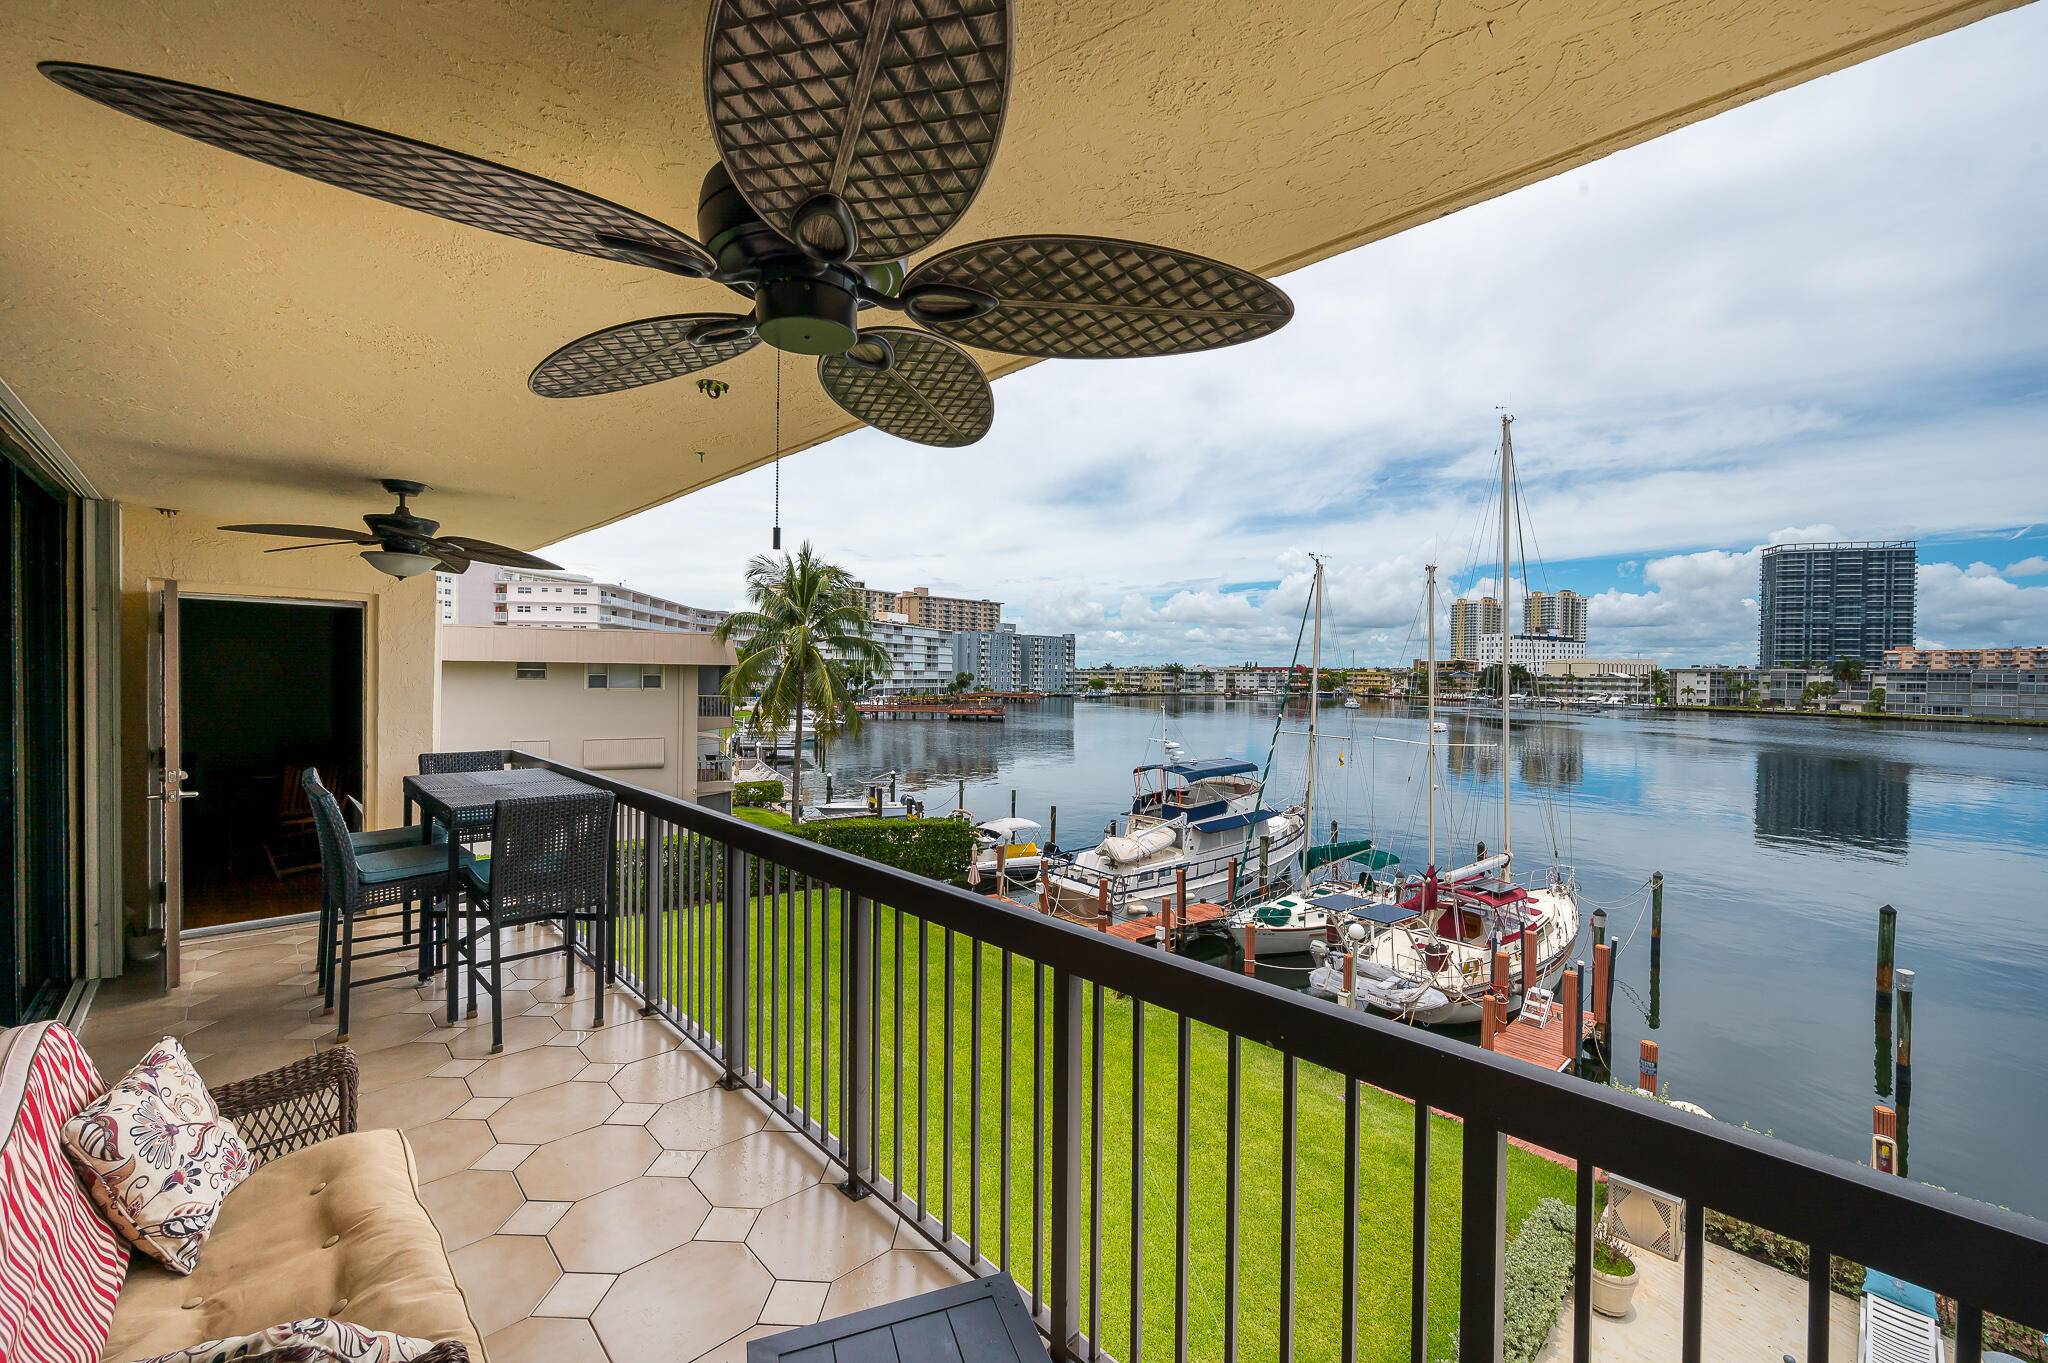 FABULOUS LOCATION, LARGE UNIT 2 2 PLUS, BALCONY OVERLOOKING GOLDEN ISLES LAKE, OCEAN ACCES, 50 FOOT BOAT SLIP, THIS UNIT FEATURES AN LARGE MASTER BEDROOM EAT IN KITCHEN FAMILY ROOM, ...